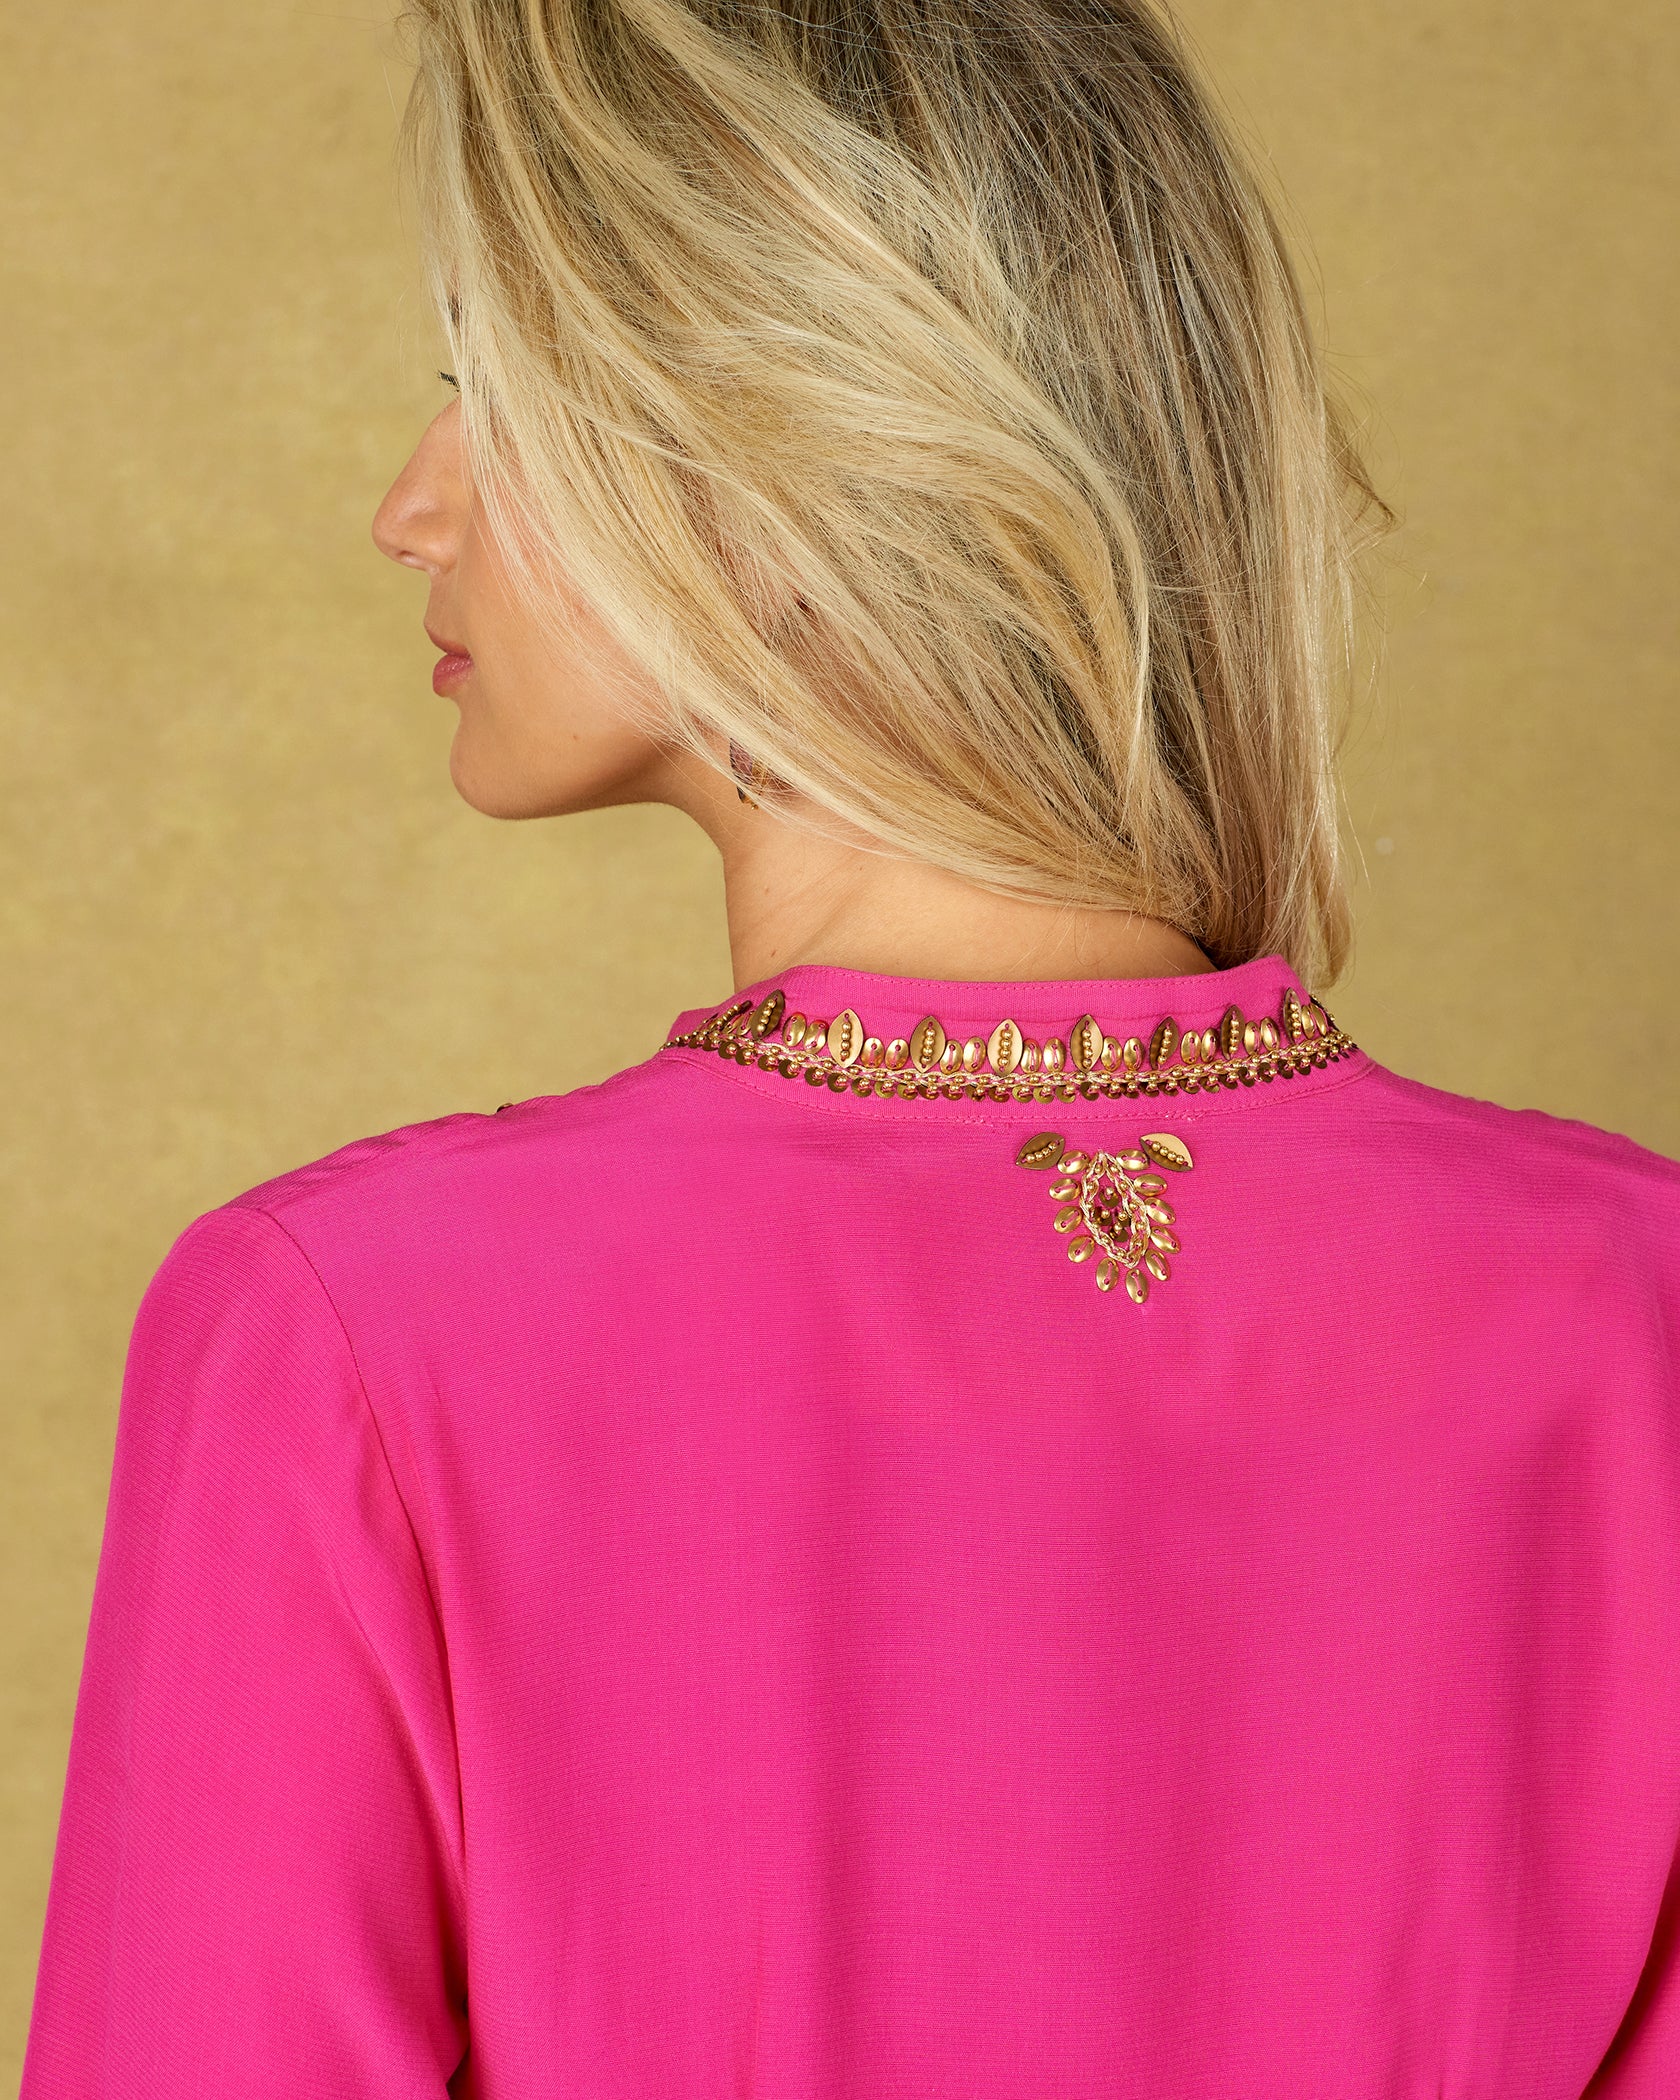 Callista Tunic in Hot Pink and Gold Embellishment-Back View showcasing gold embellished detail